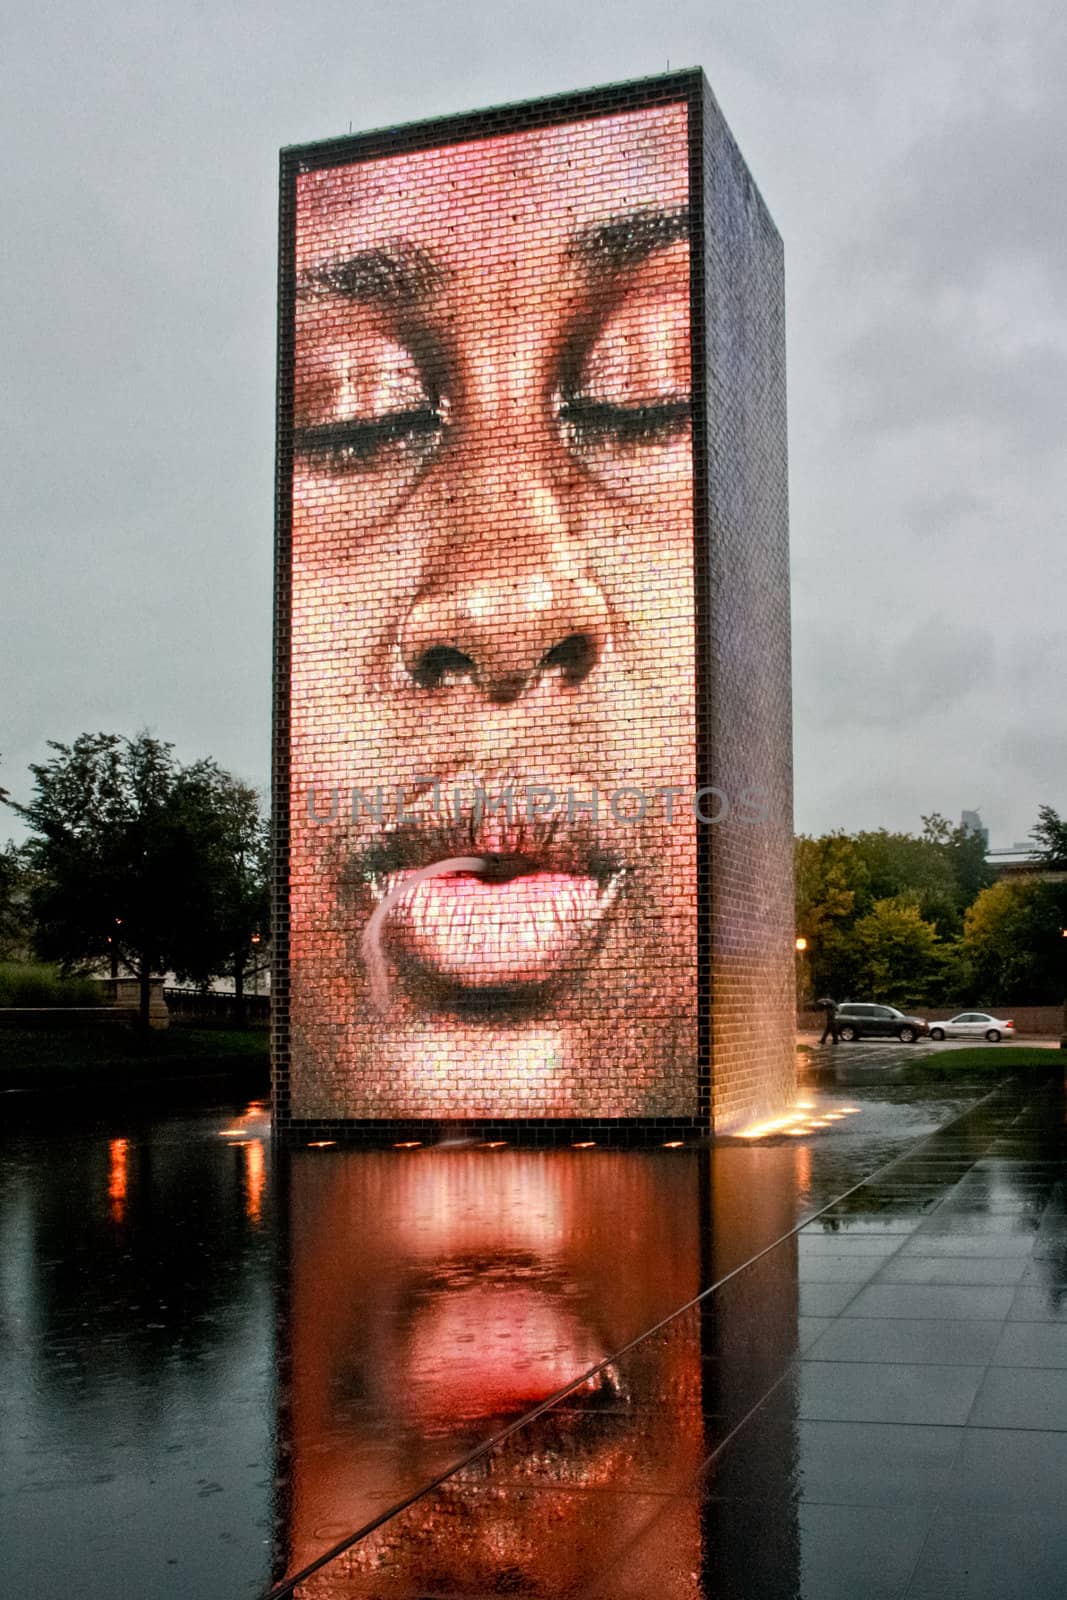 Chicago Crown Fountain by derejeb